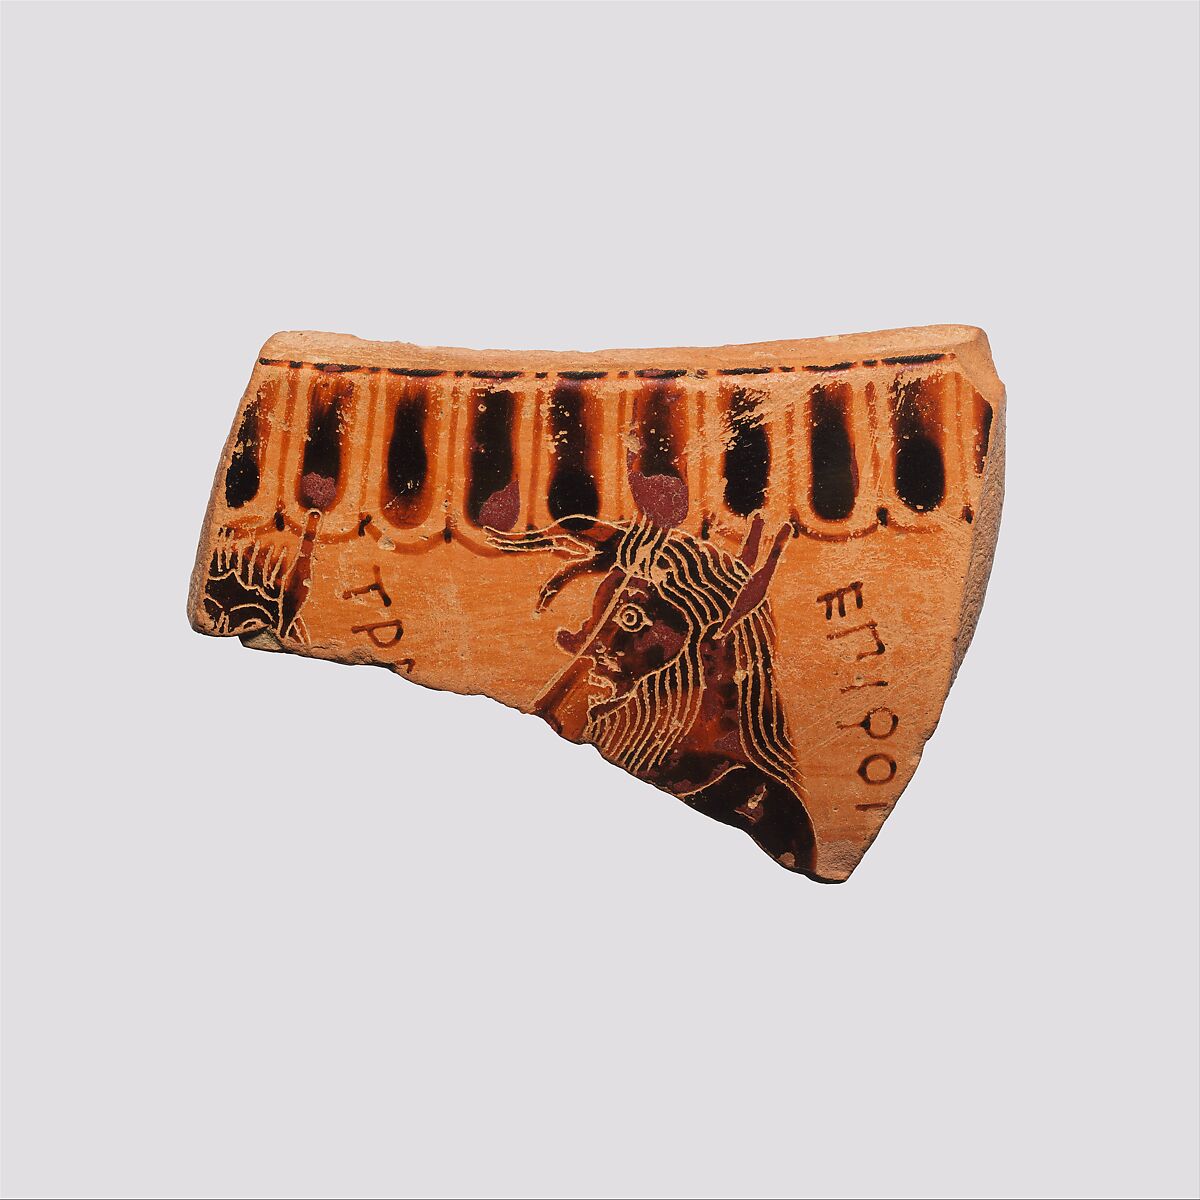 Fragment of a terracotta krater or dinos (bowl for mixing wine and water), Attributed to Sophilos, Terracotta, Greek, Attic 